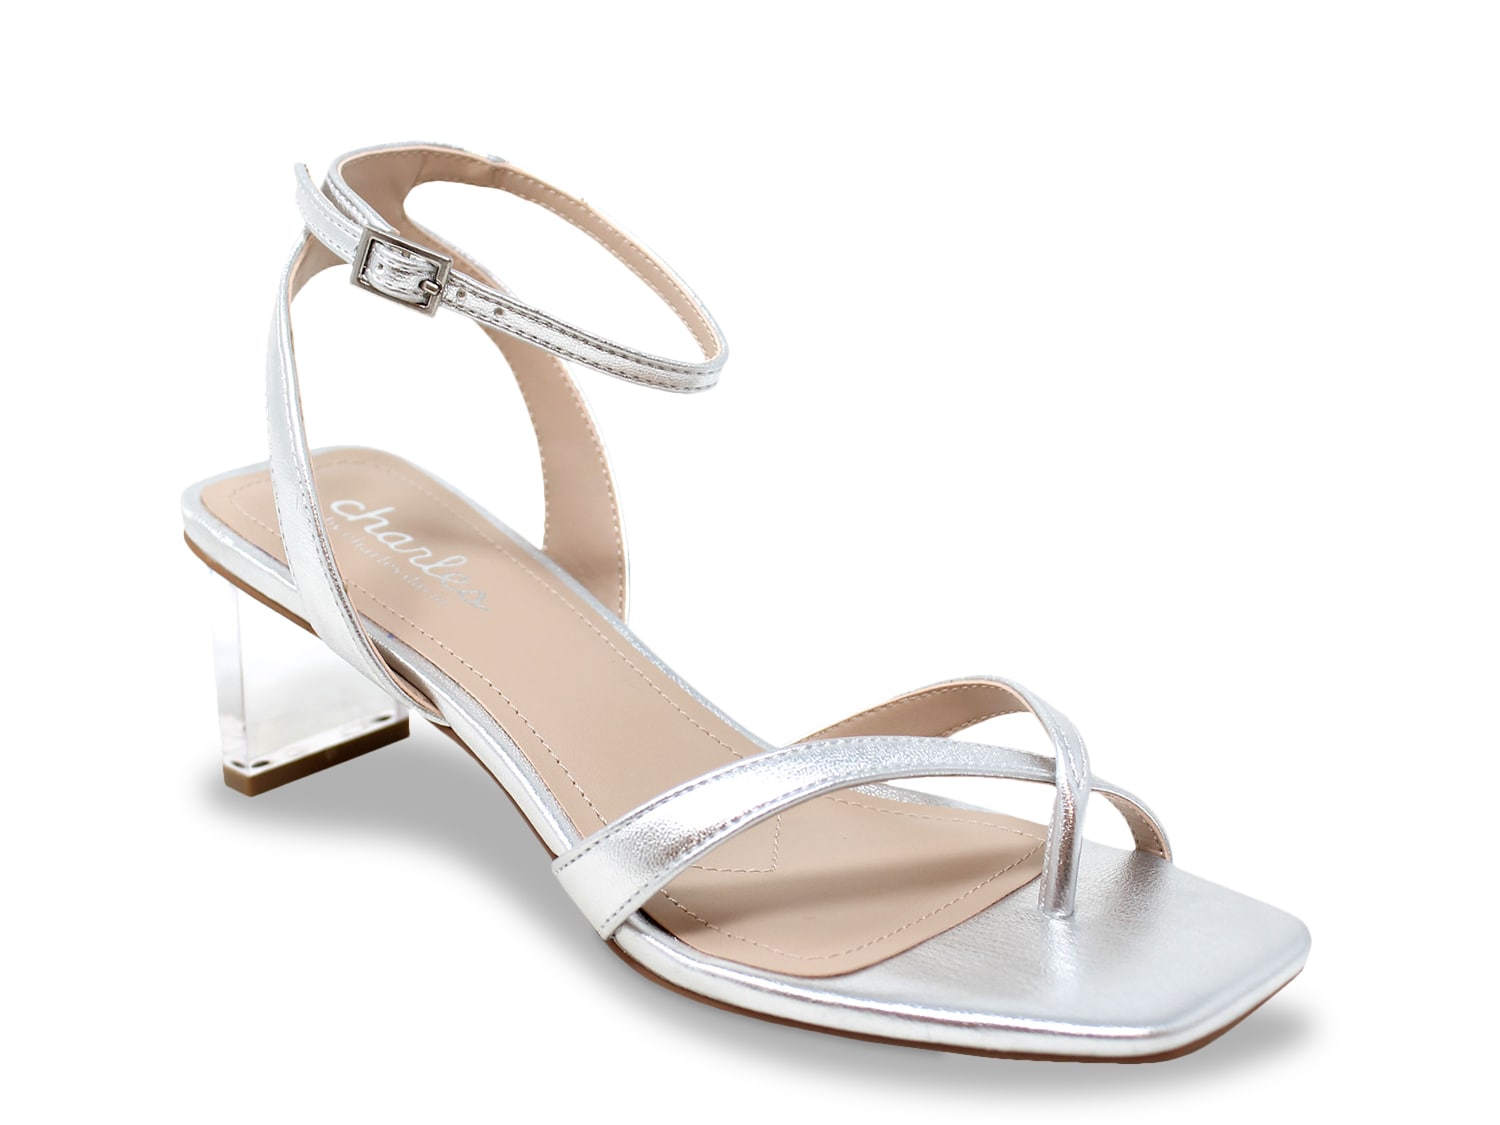 Charles by Charles David Fancy Sandal - Free Shipping | DSW